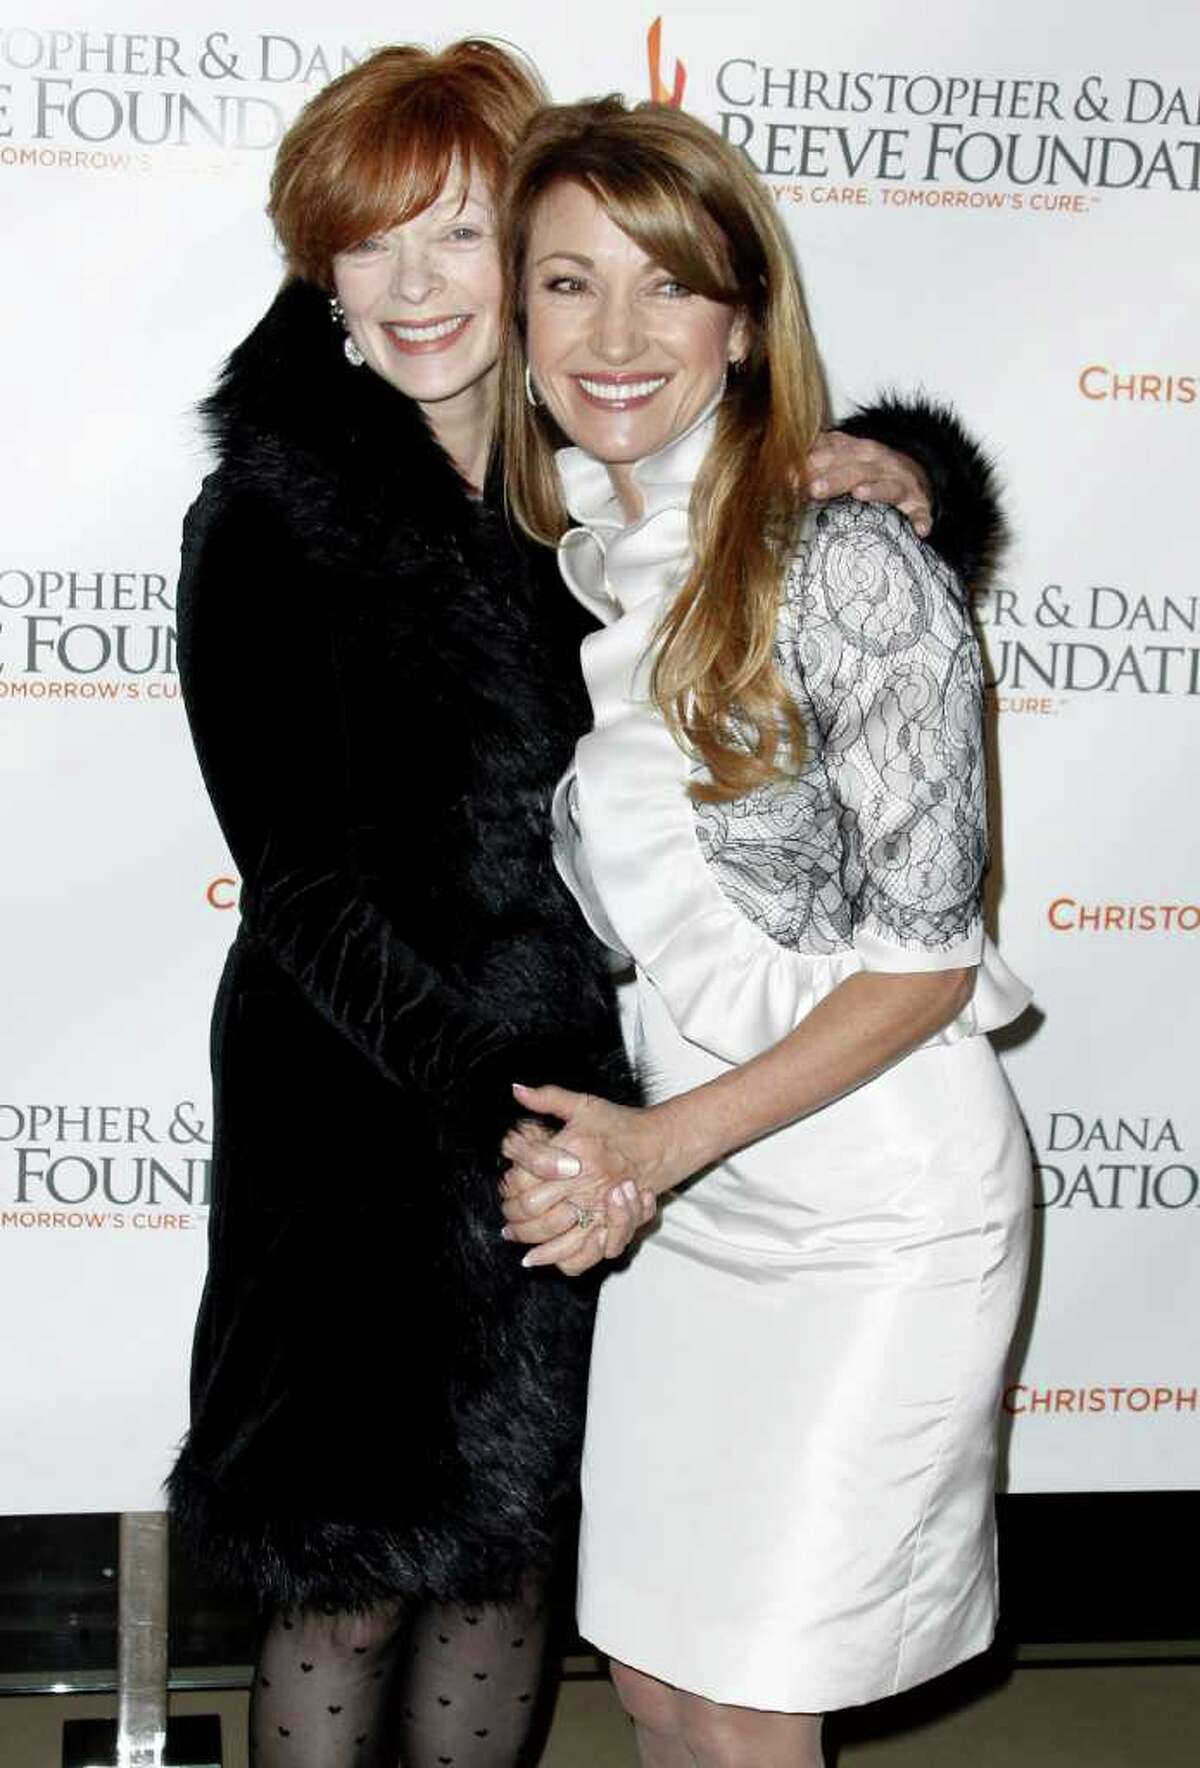 Actresses Jane Seymour, right, and Frances Fisher pose at the 4th Annual Christopher and Dana Reeve Foundation Gala in Beverly Hills, Calif., on Dec. 2, 2008.